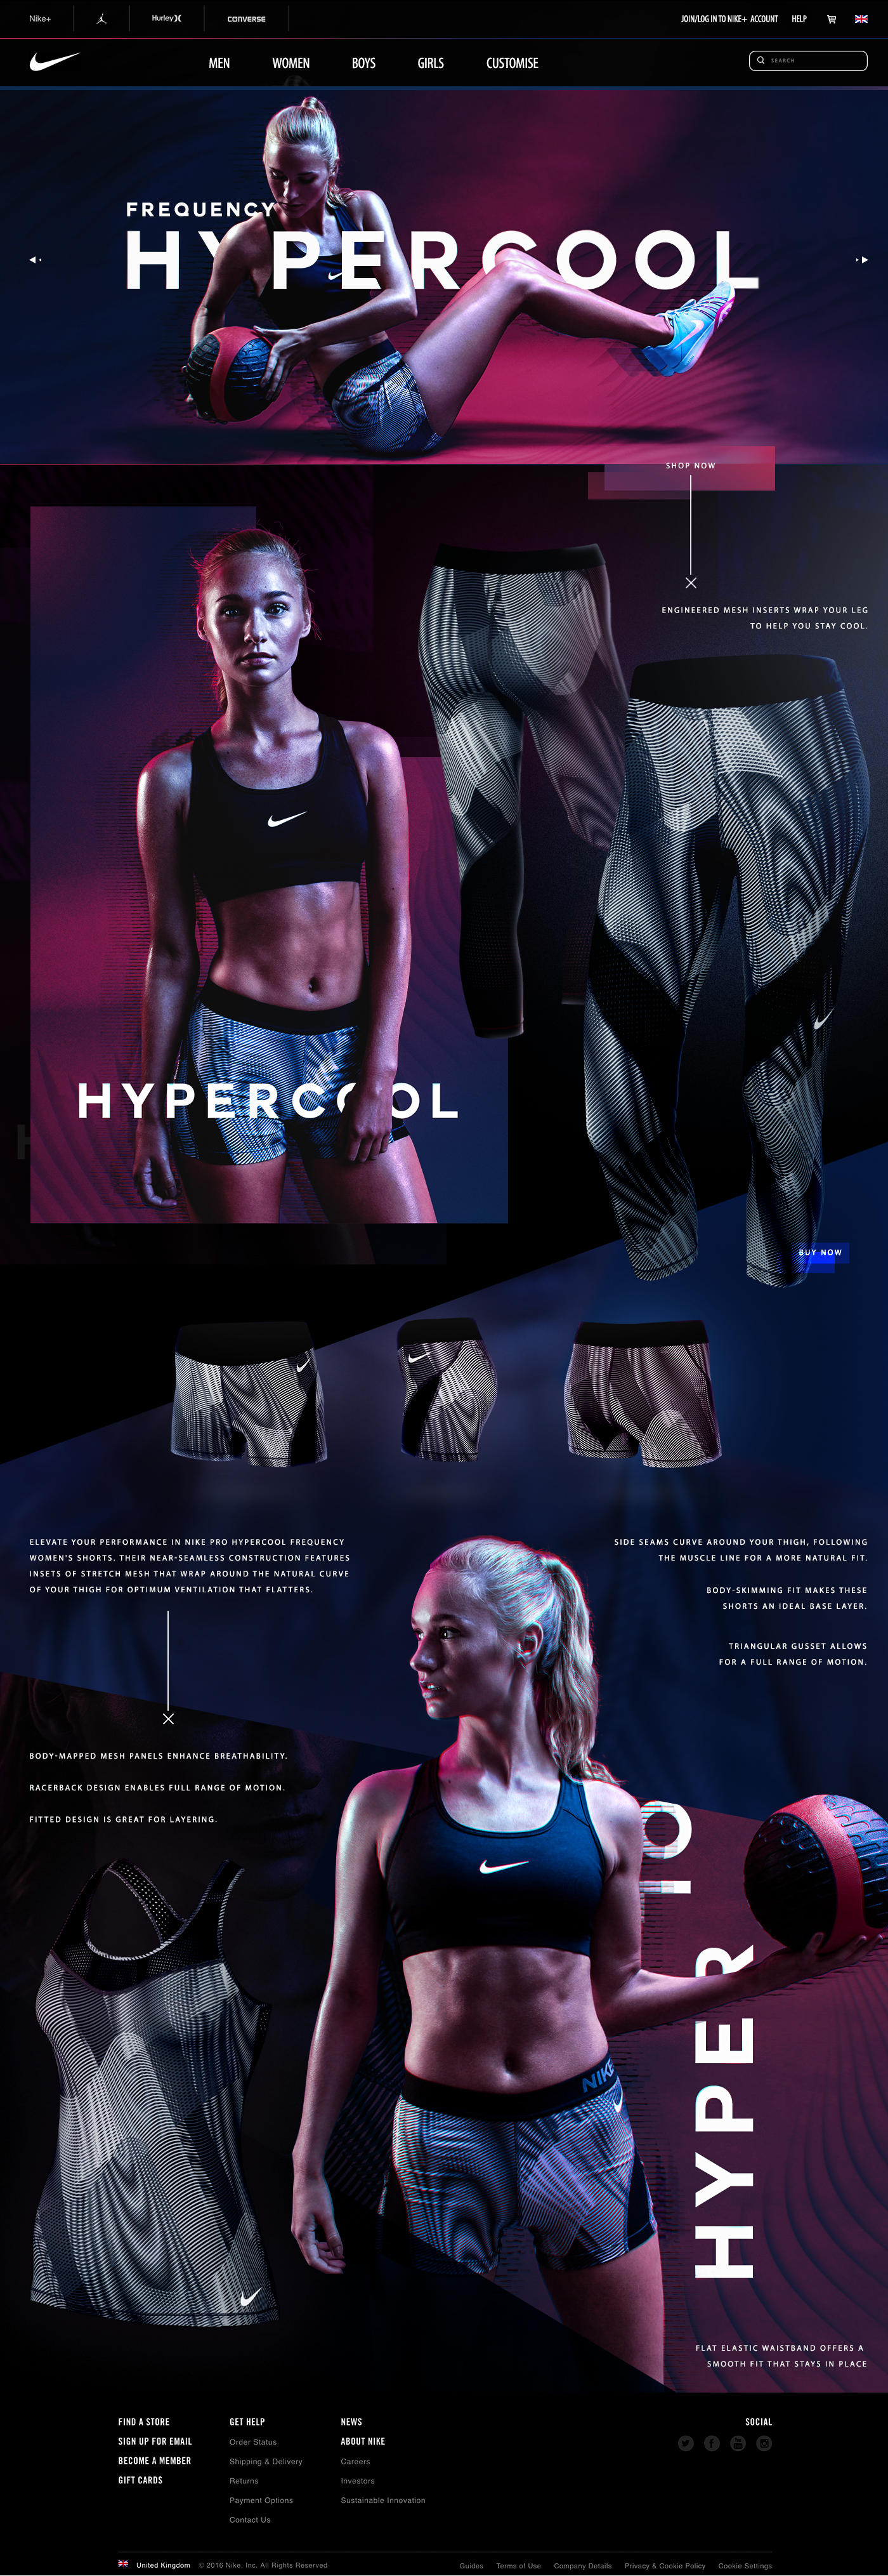 design Nike Web advertisement campaign Frequency